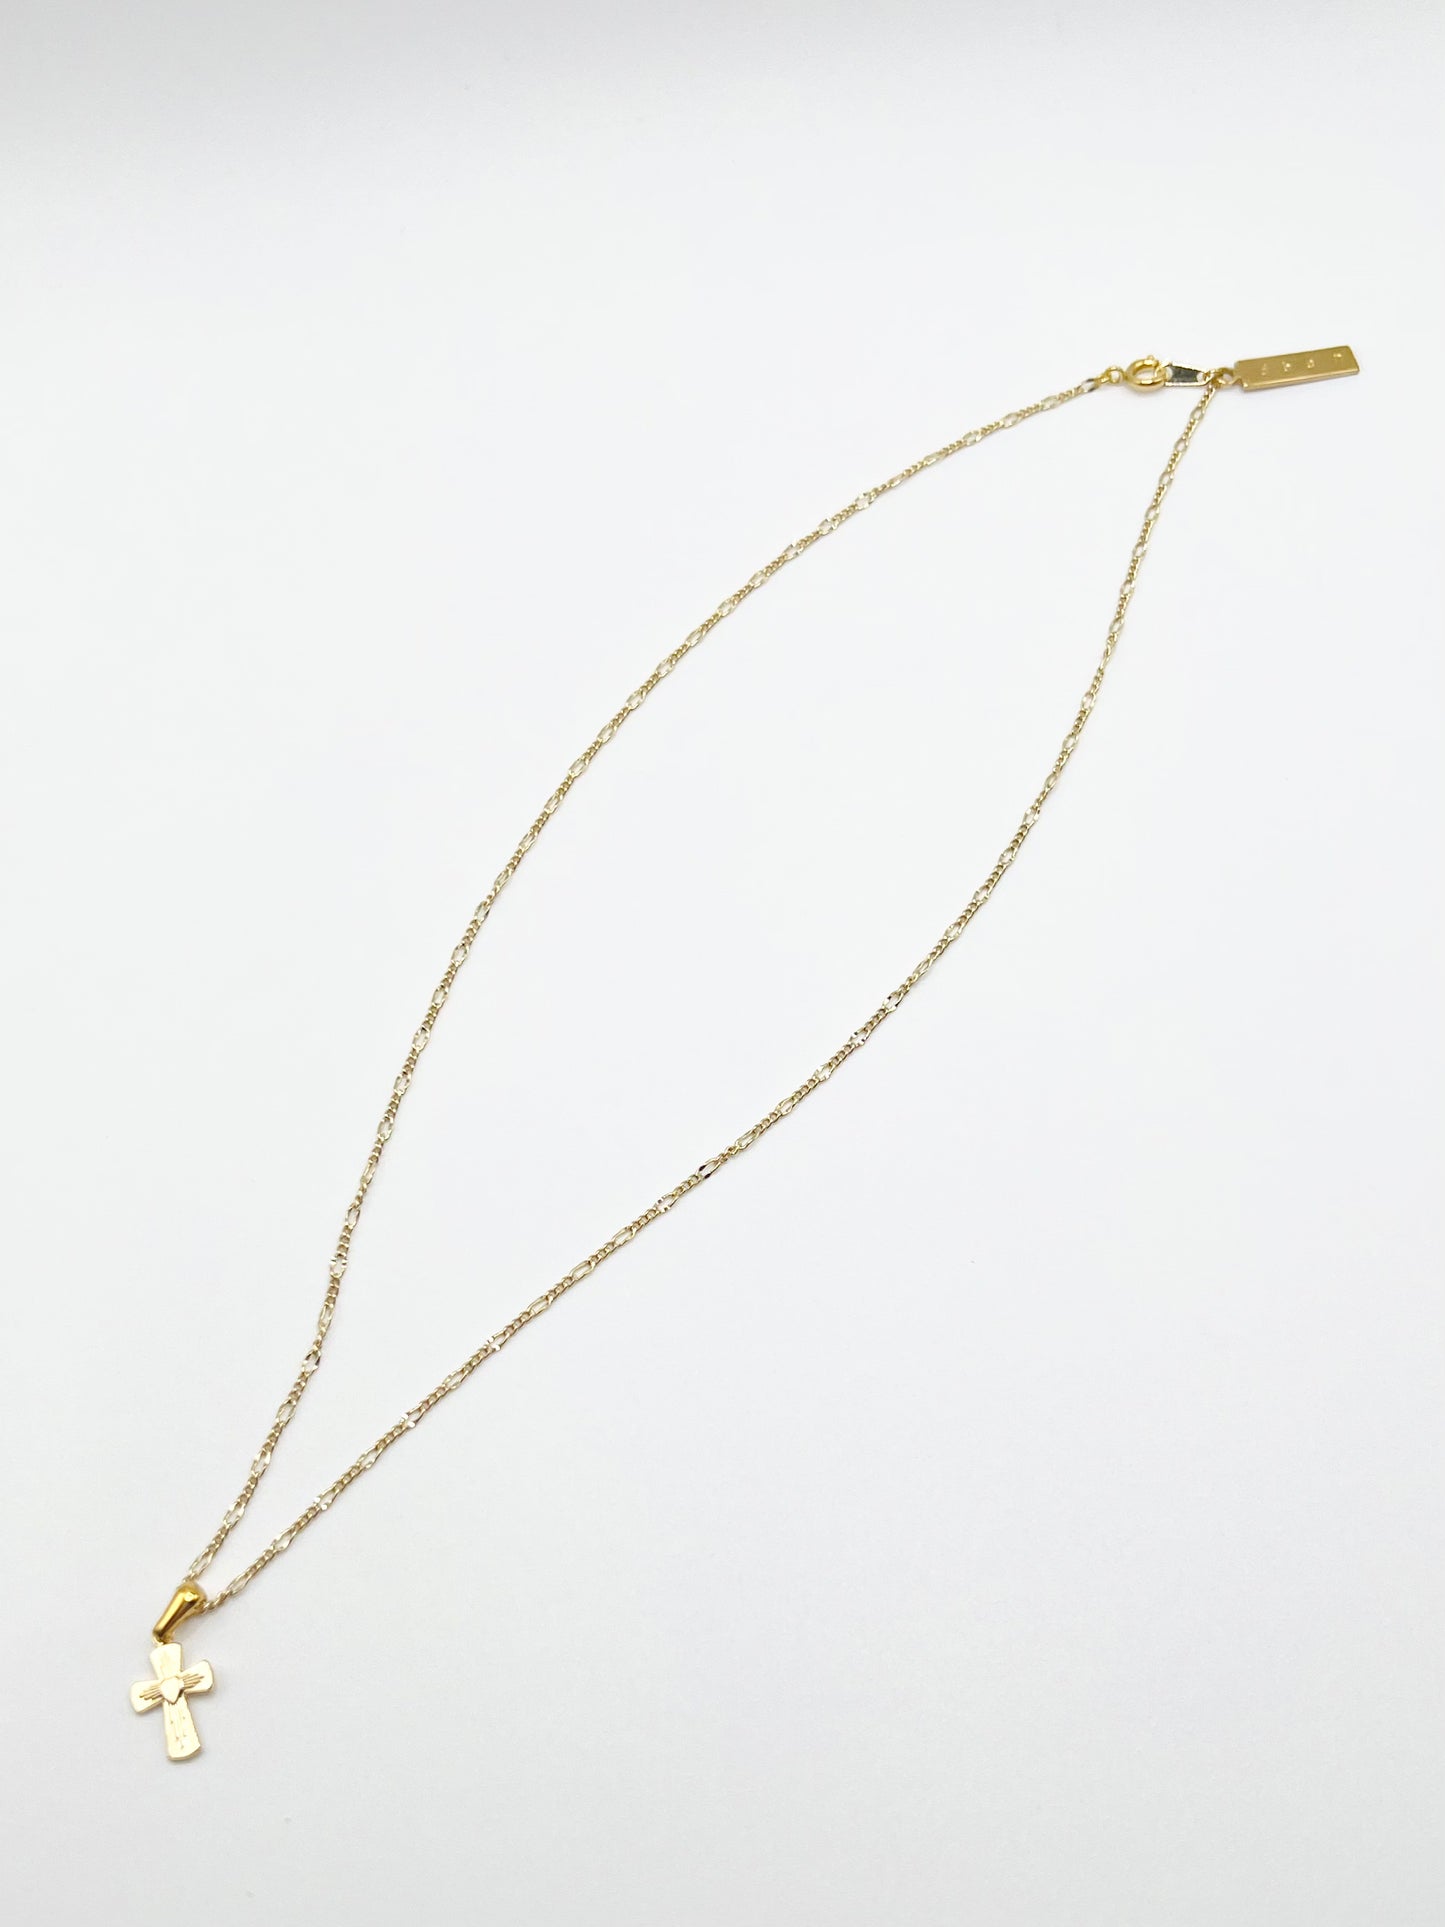 NW cross motif necklace - Gold